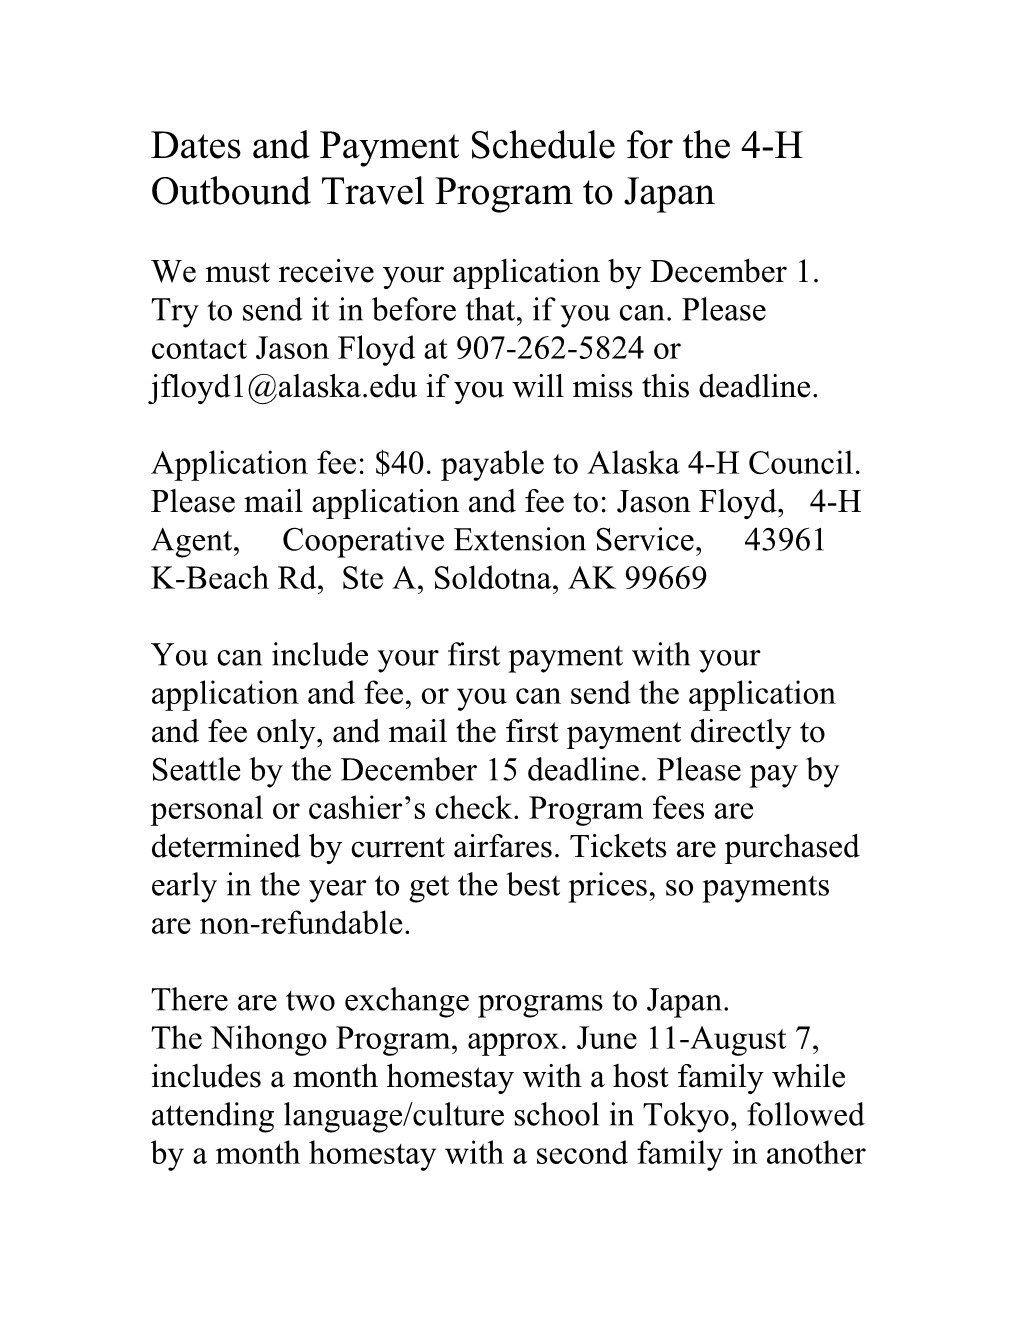 Payment Schedule for 2013 4-H Outbound Travel Program to Japan